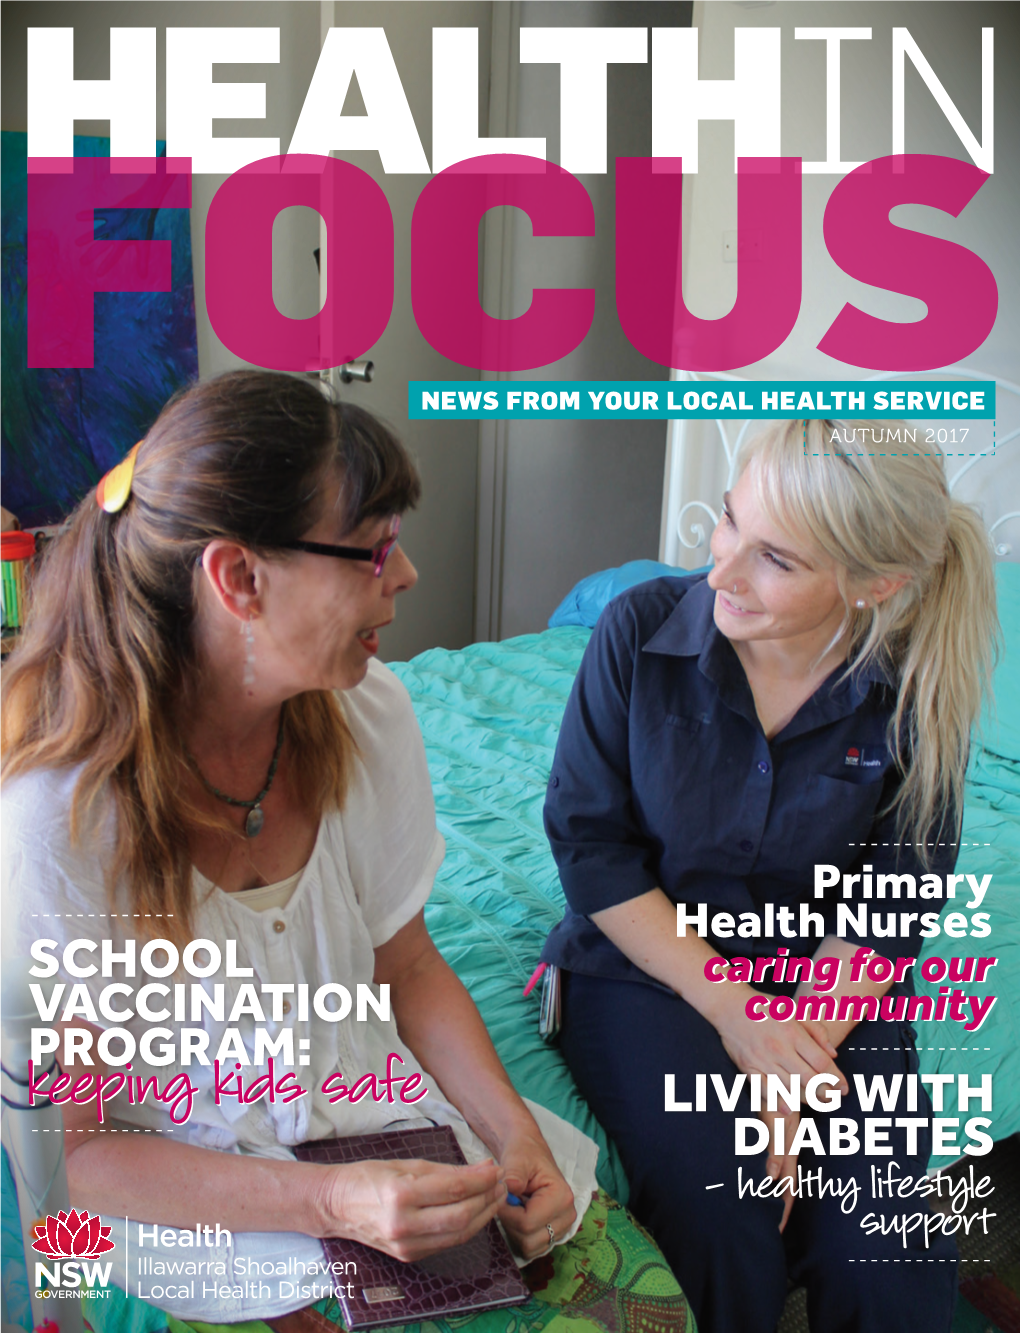 Focusnews from Your Local Health Service Autumn 2017